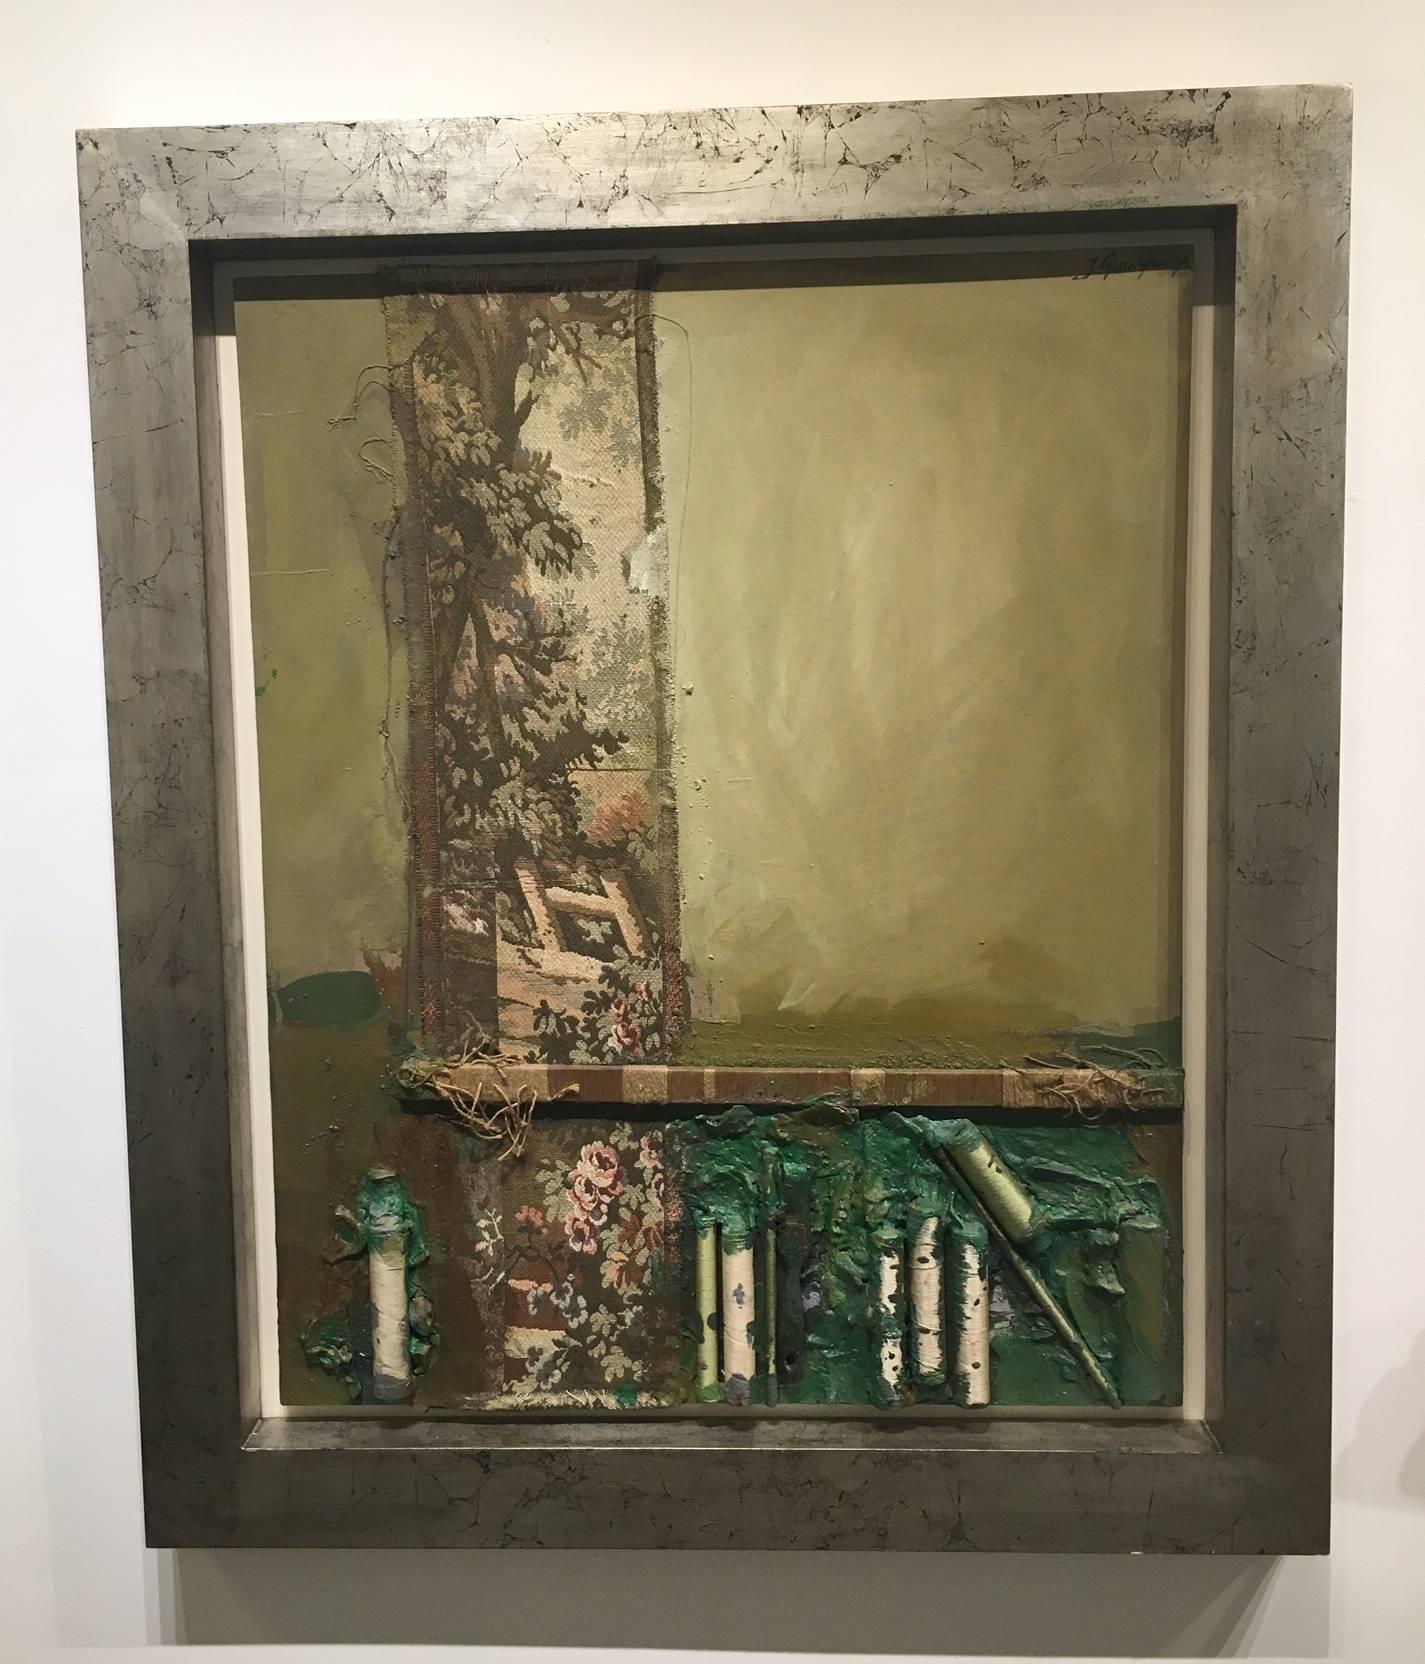 Homenaje al tapiz- original abstract mixed media painting. frame


GRAU-GARRIGA, Josep (San Cugat del Valles, 1928 - Angers, 2011). 
Grau-Garriga was a Catalan artist, muralist and one of the innovators of contemporary tapestry, whose work is in the